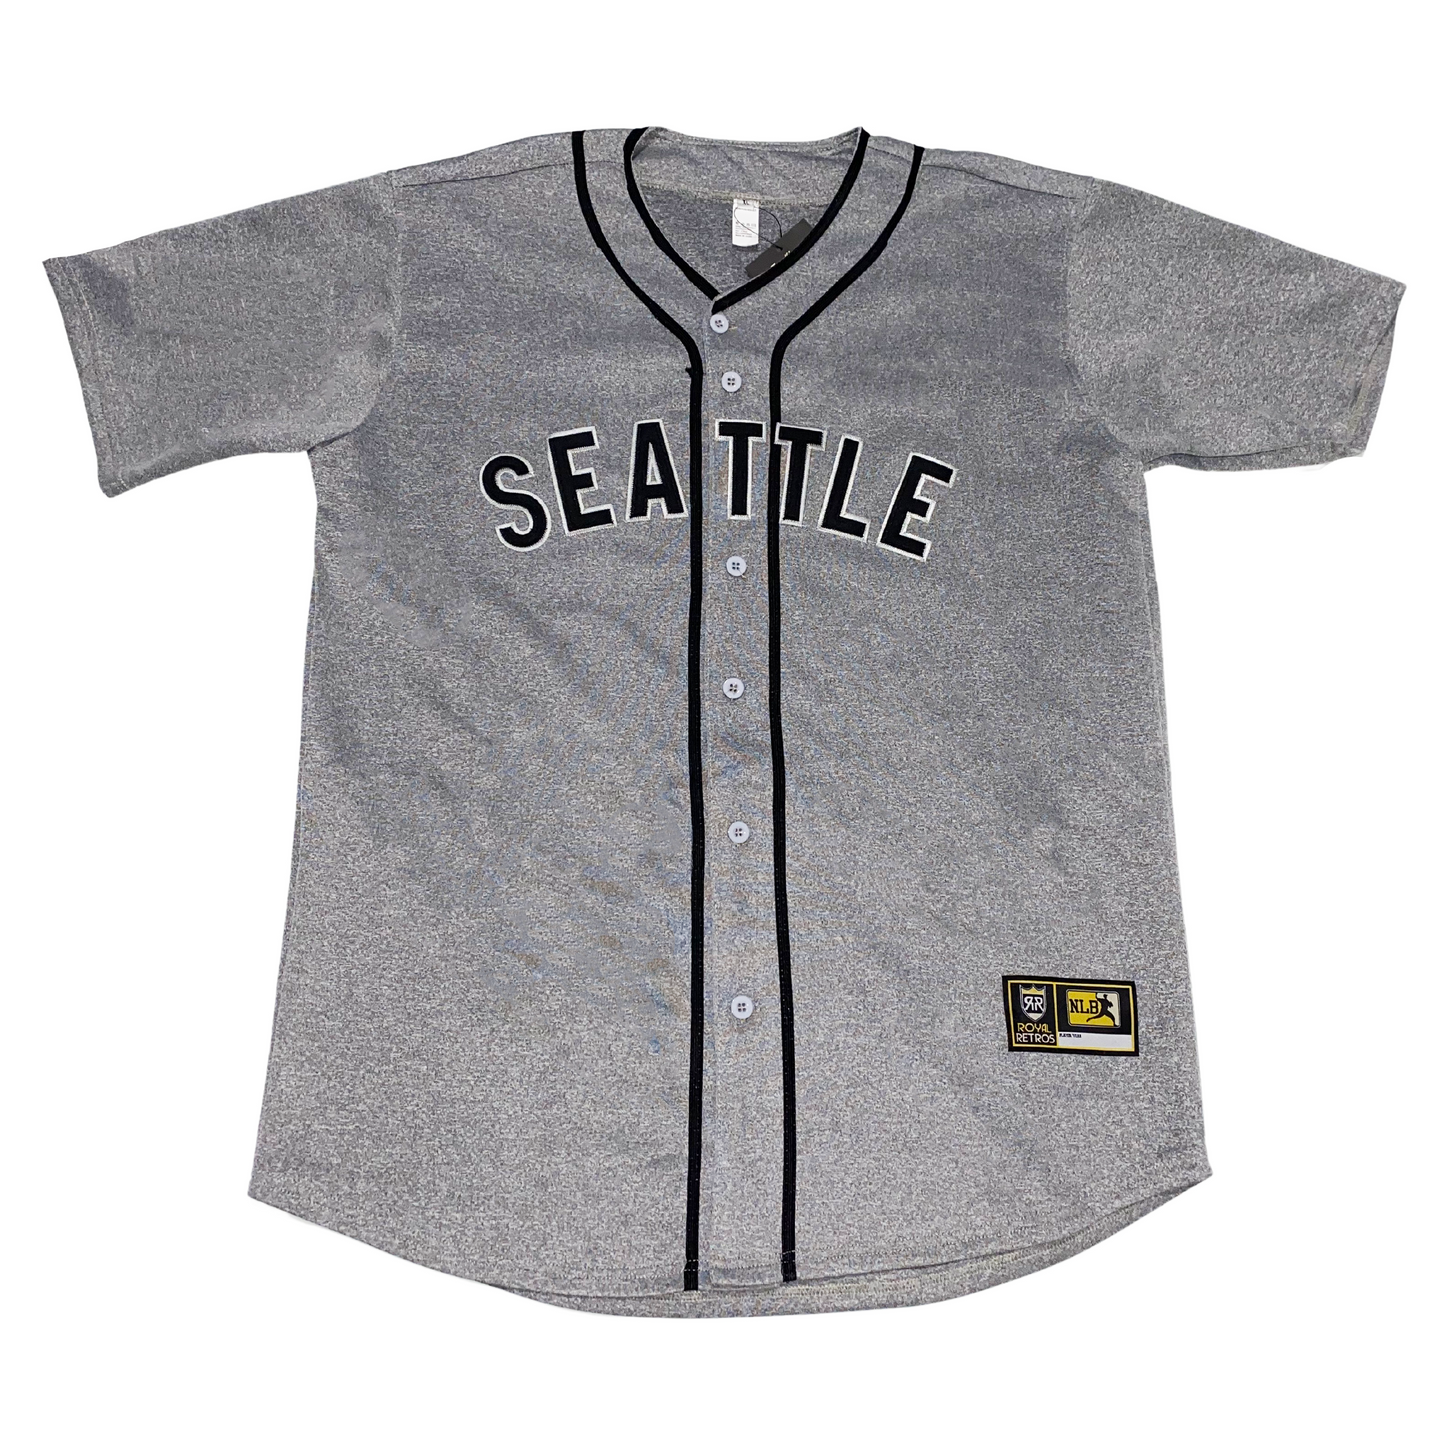 The Seattle Steelheads collection is available NOW at all